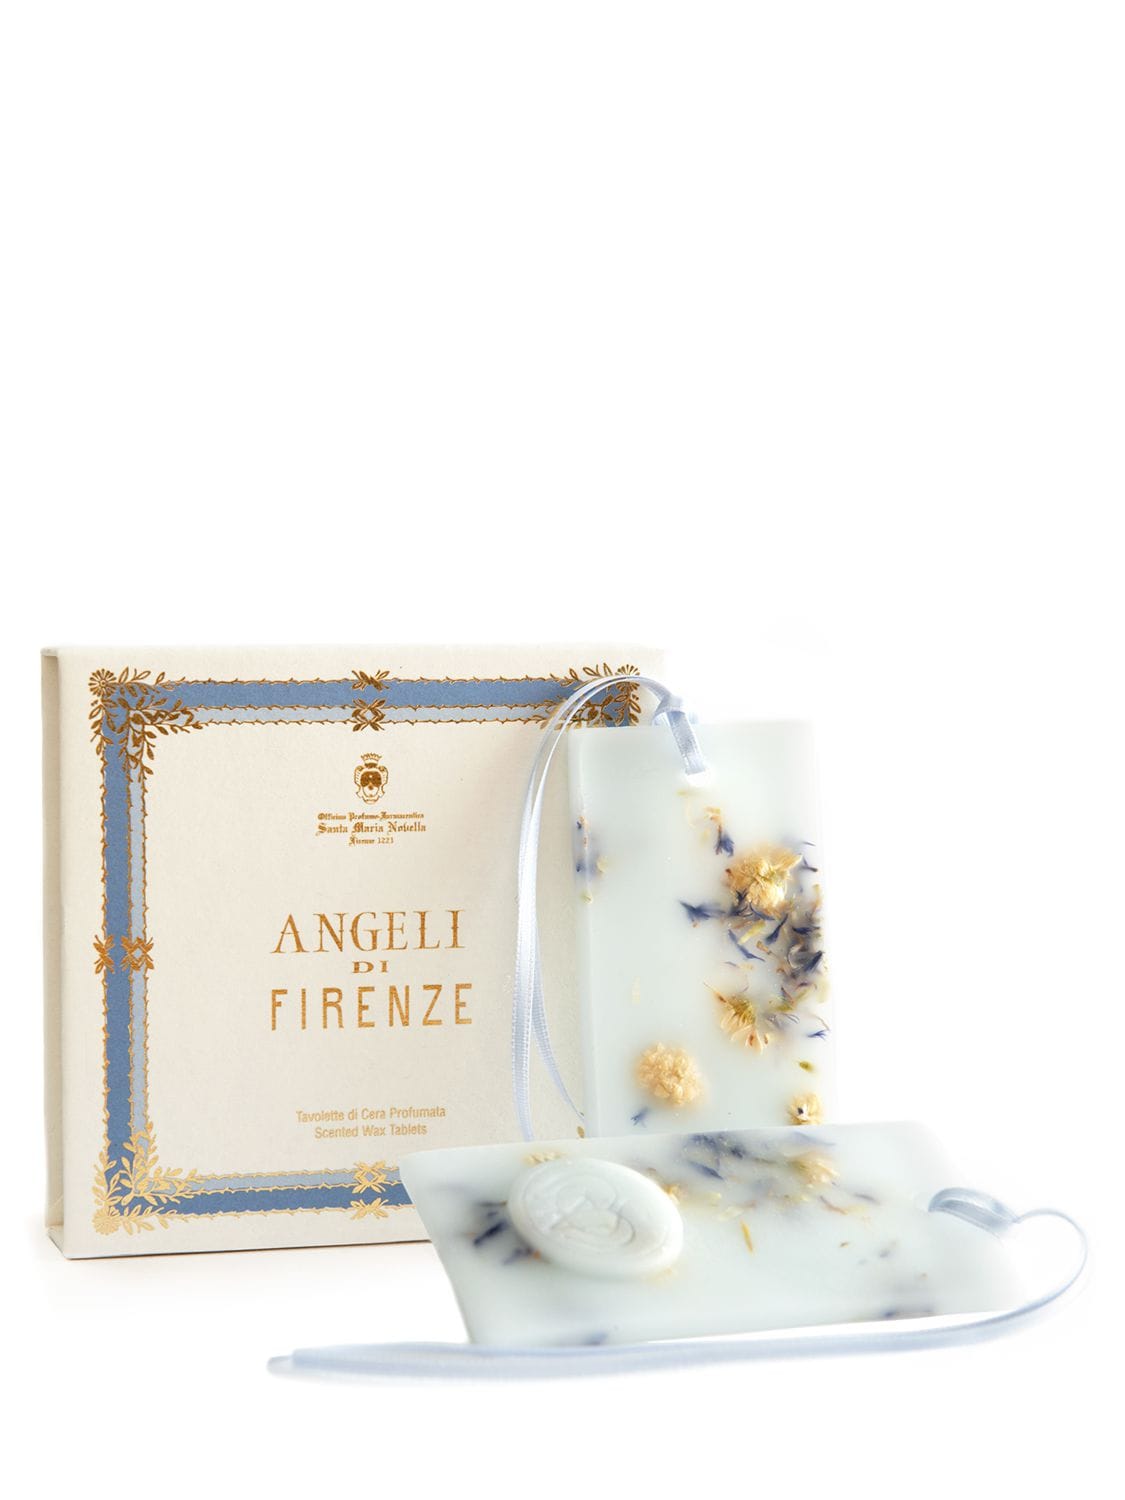 Image of Angeli Di Firenze Scented Wax Tablets